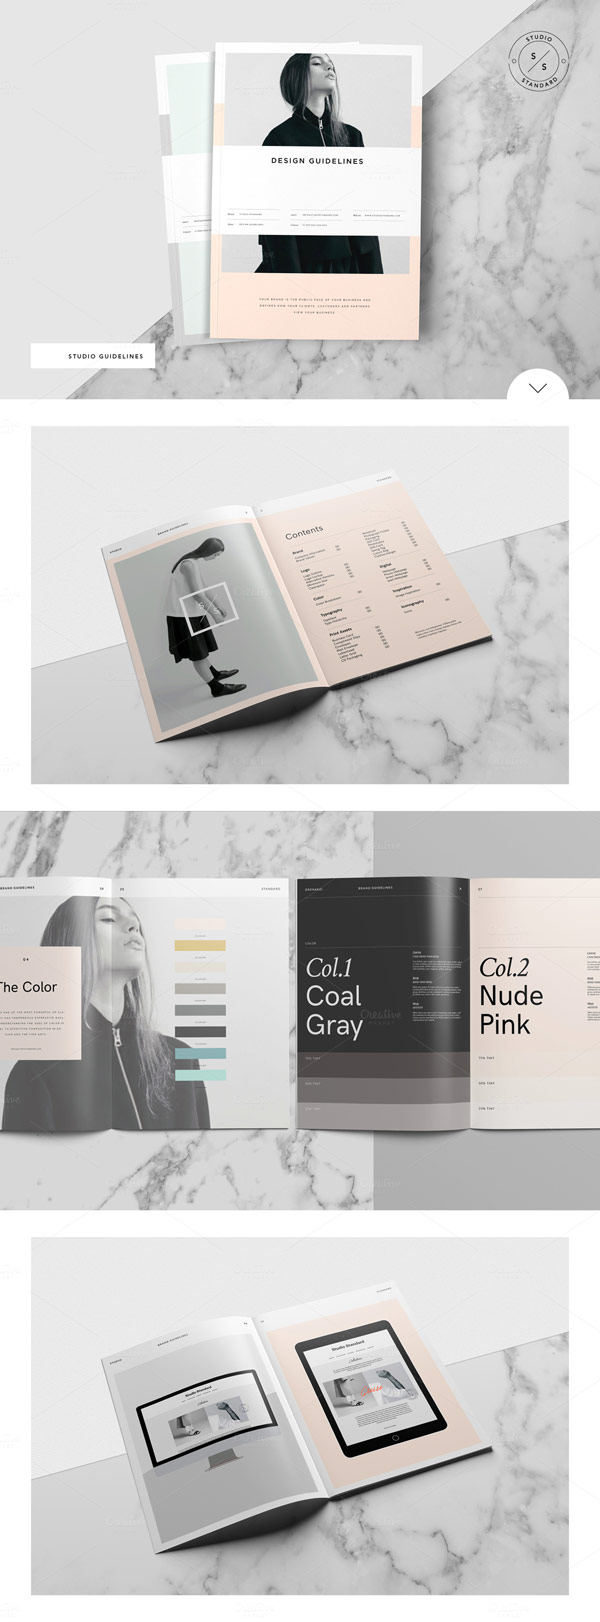 A comprehensive and well designed studio branding guidelines template.